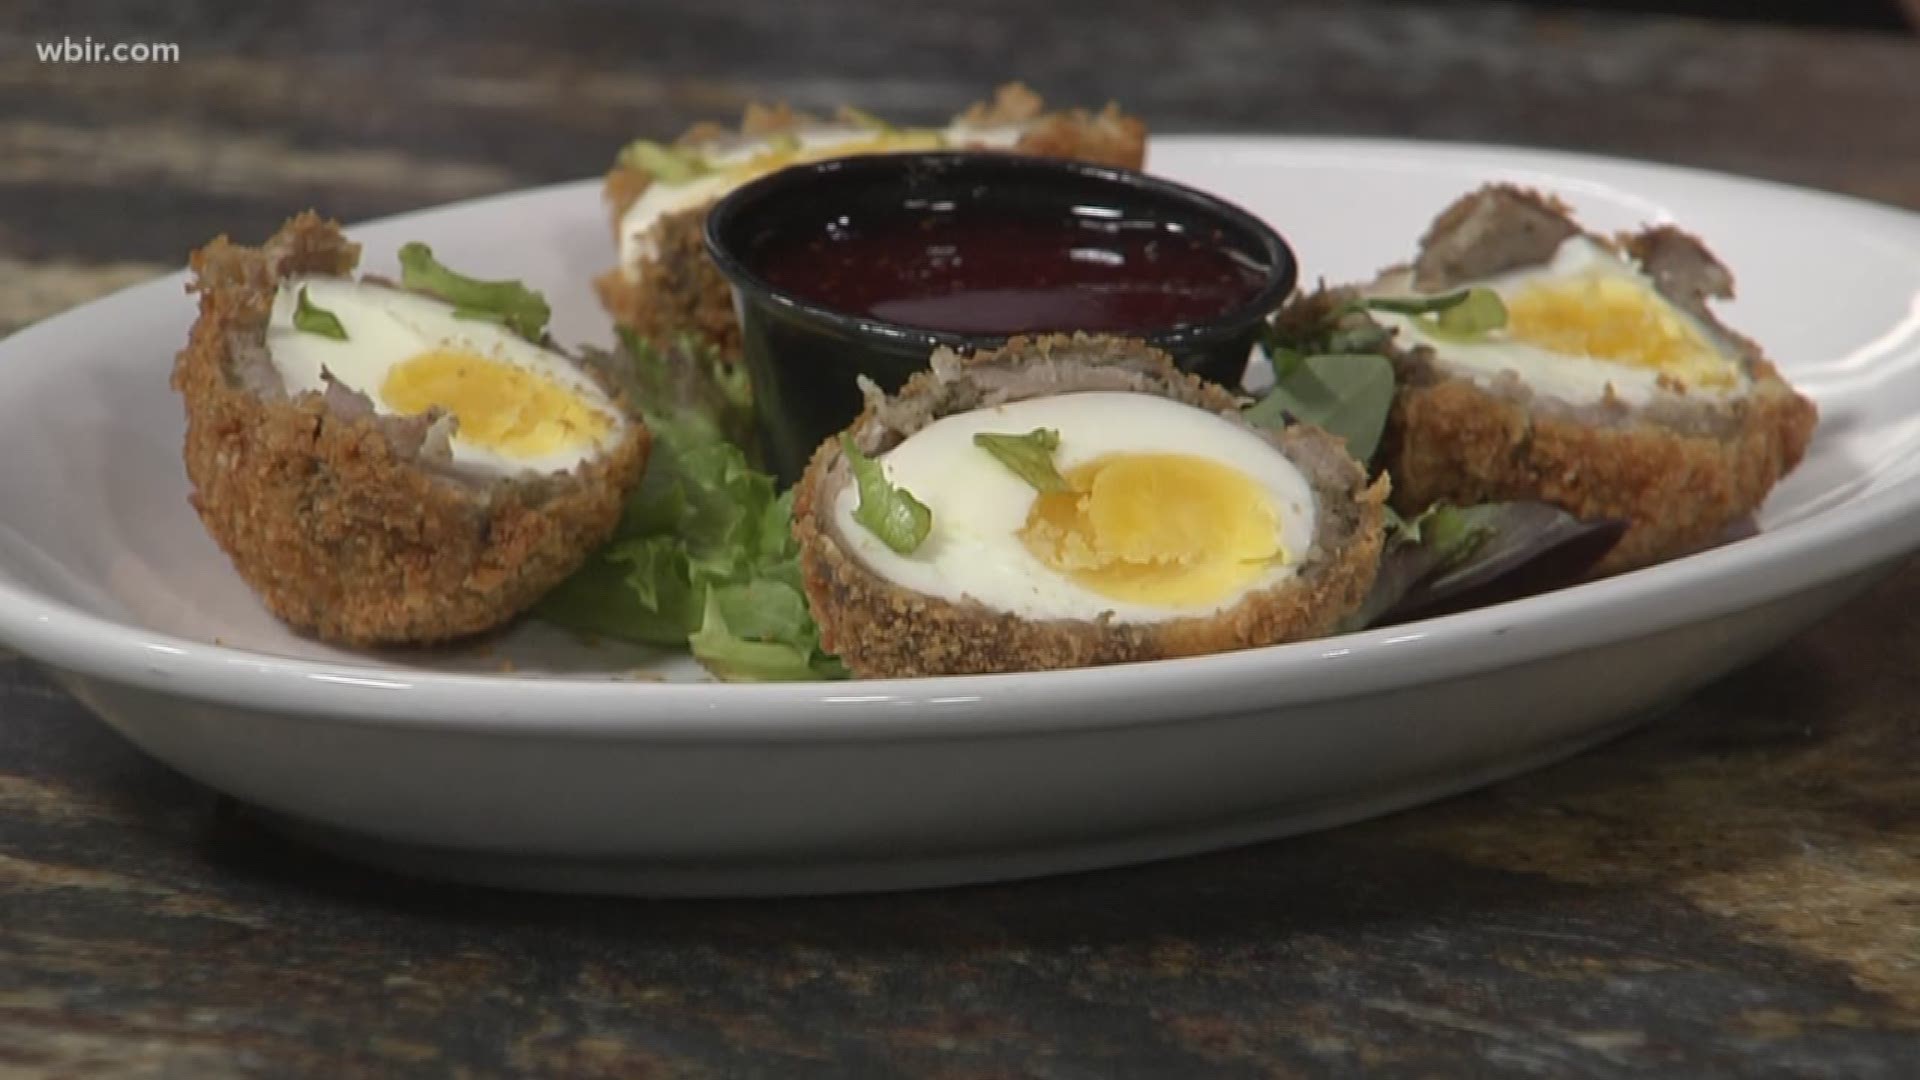 Chef Gary Harper with Finn's Restaurant and Tavern shows how to make Scottish Eggs. Finn's is located at 9000 o Kingston Pike/Peters Road in the former Baker-Peters home. Visit finnstavern.com to learn more. June 6, 2019-4pm.